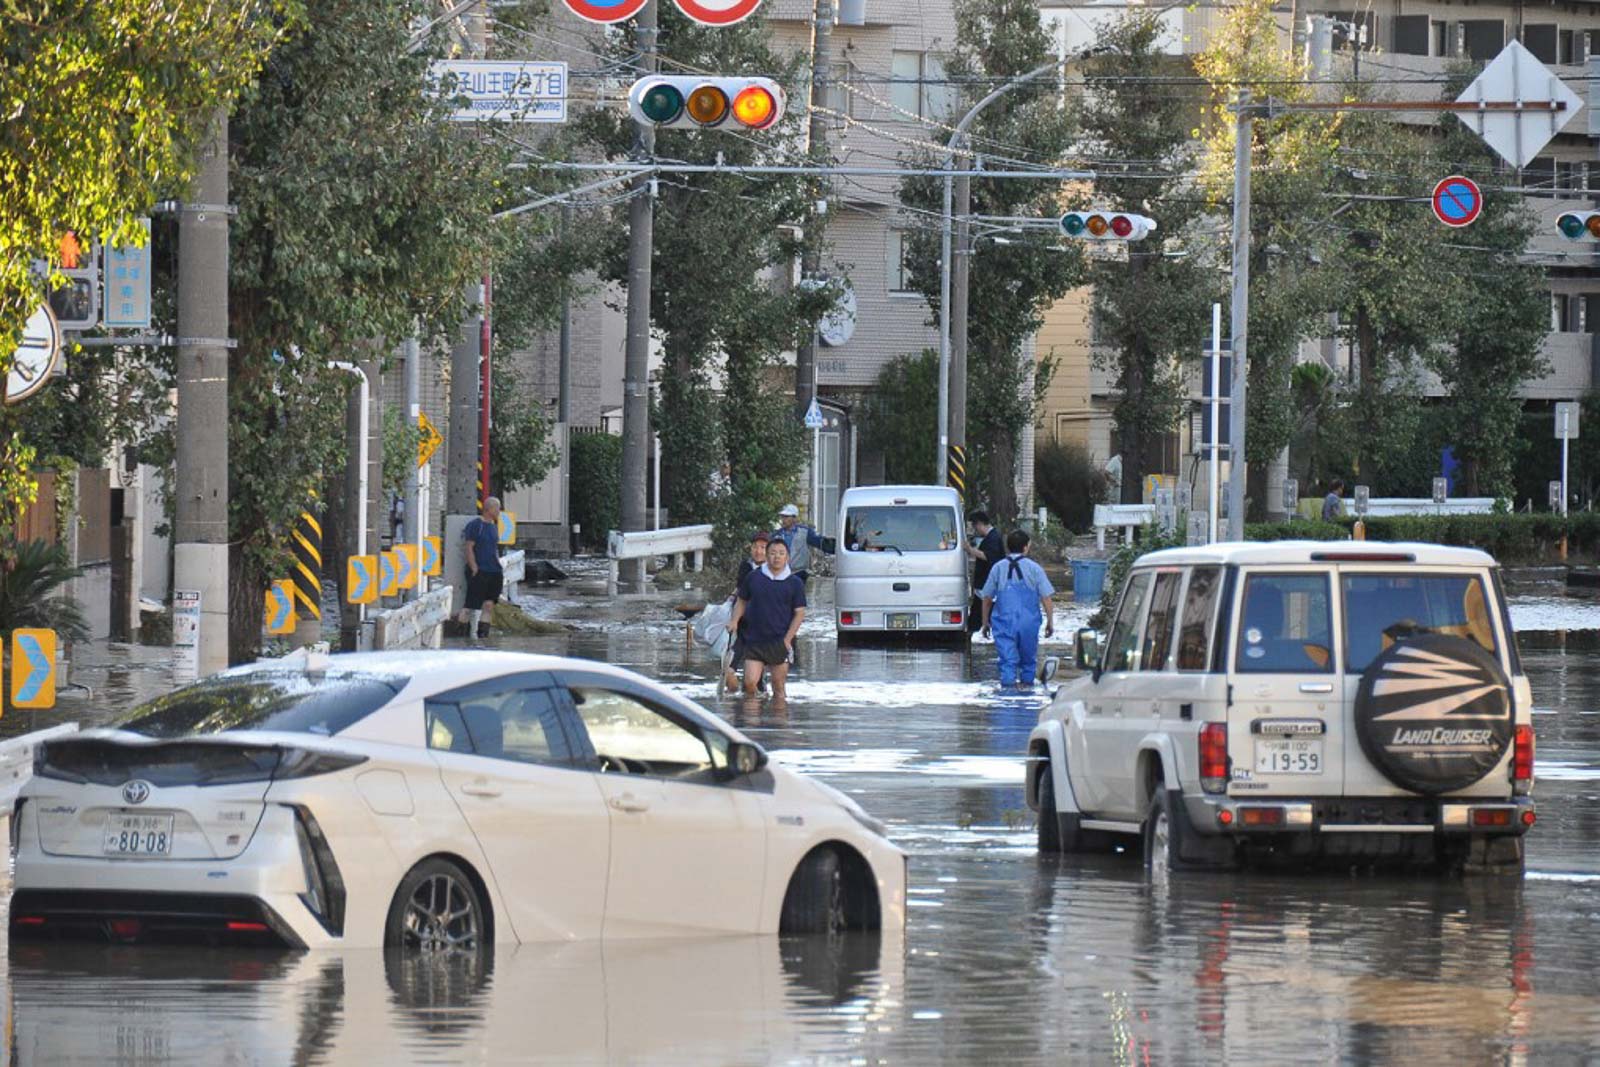 Local residents walk on a flooded street in the aftermath of Typhoon Hagibis in Kawasaki on October 13, 2019. Photo by Jiji Press/AFP 